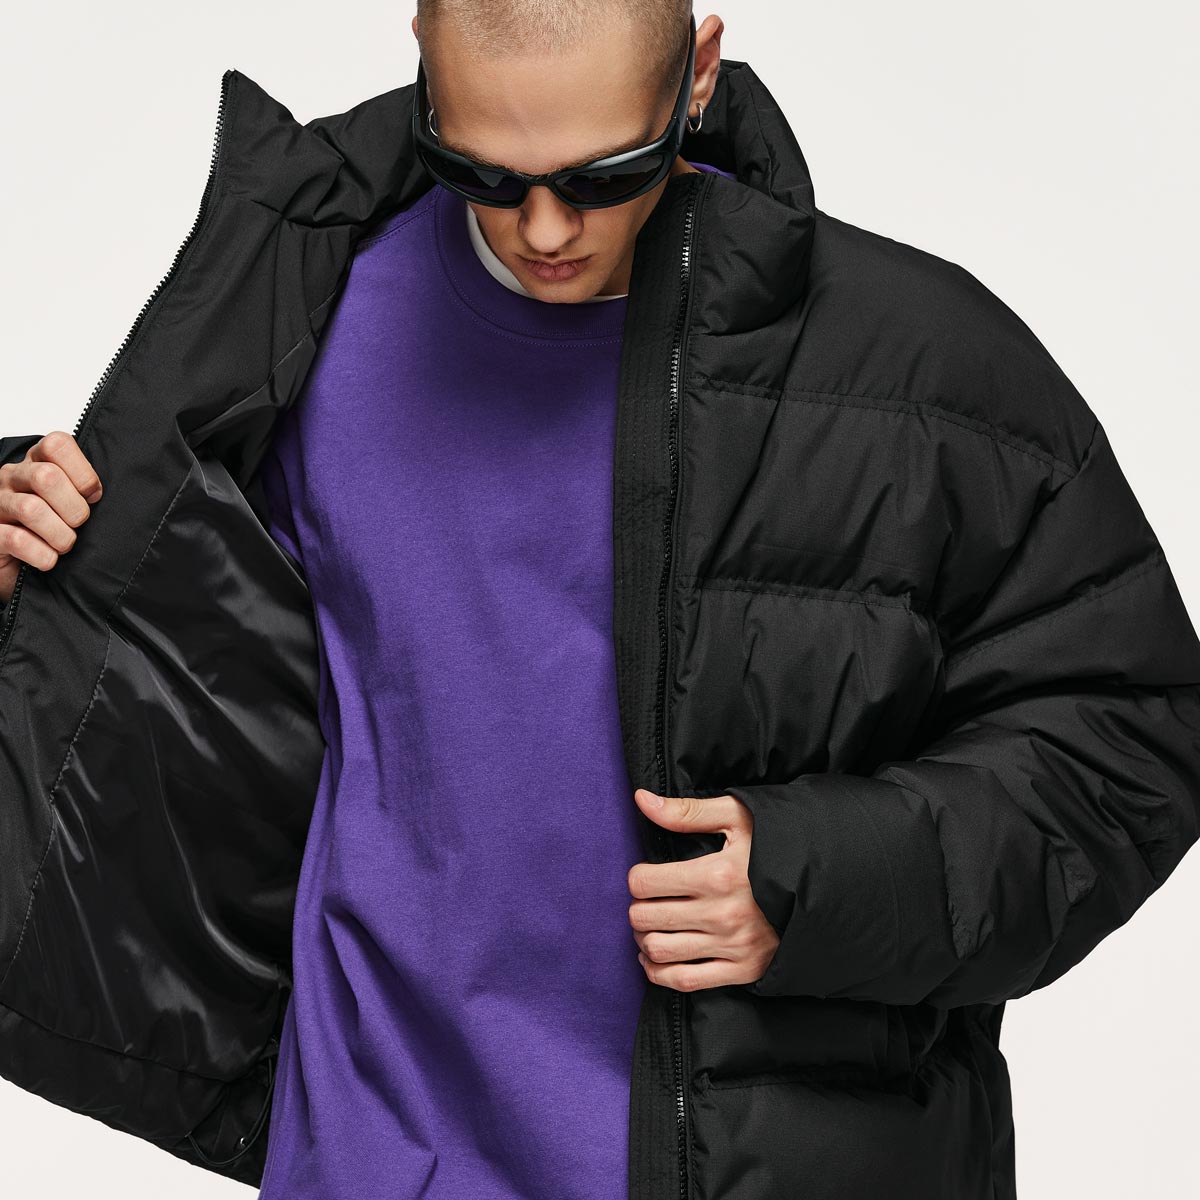 Hip-Hop and Skate Culture-Inspired Outerwear